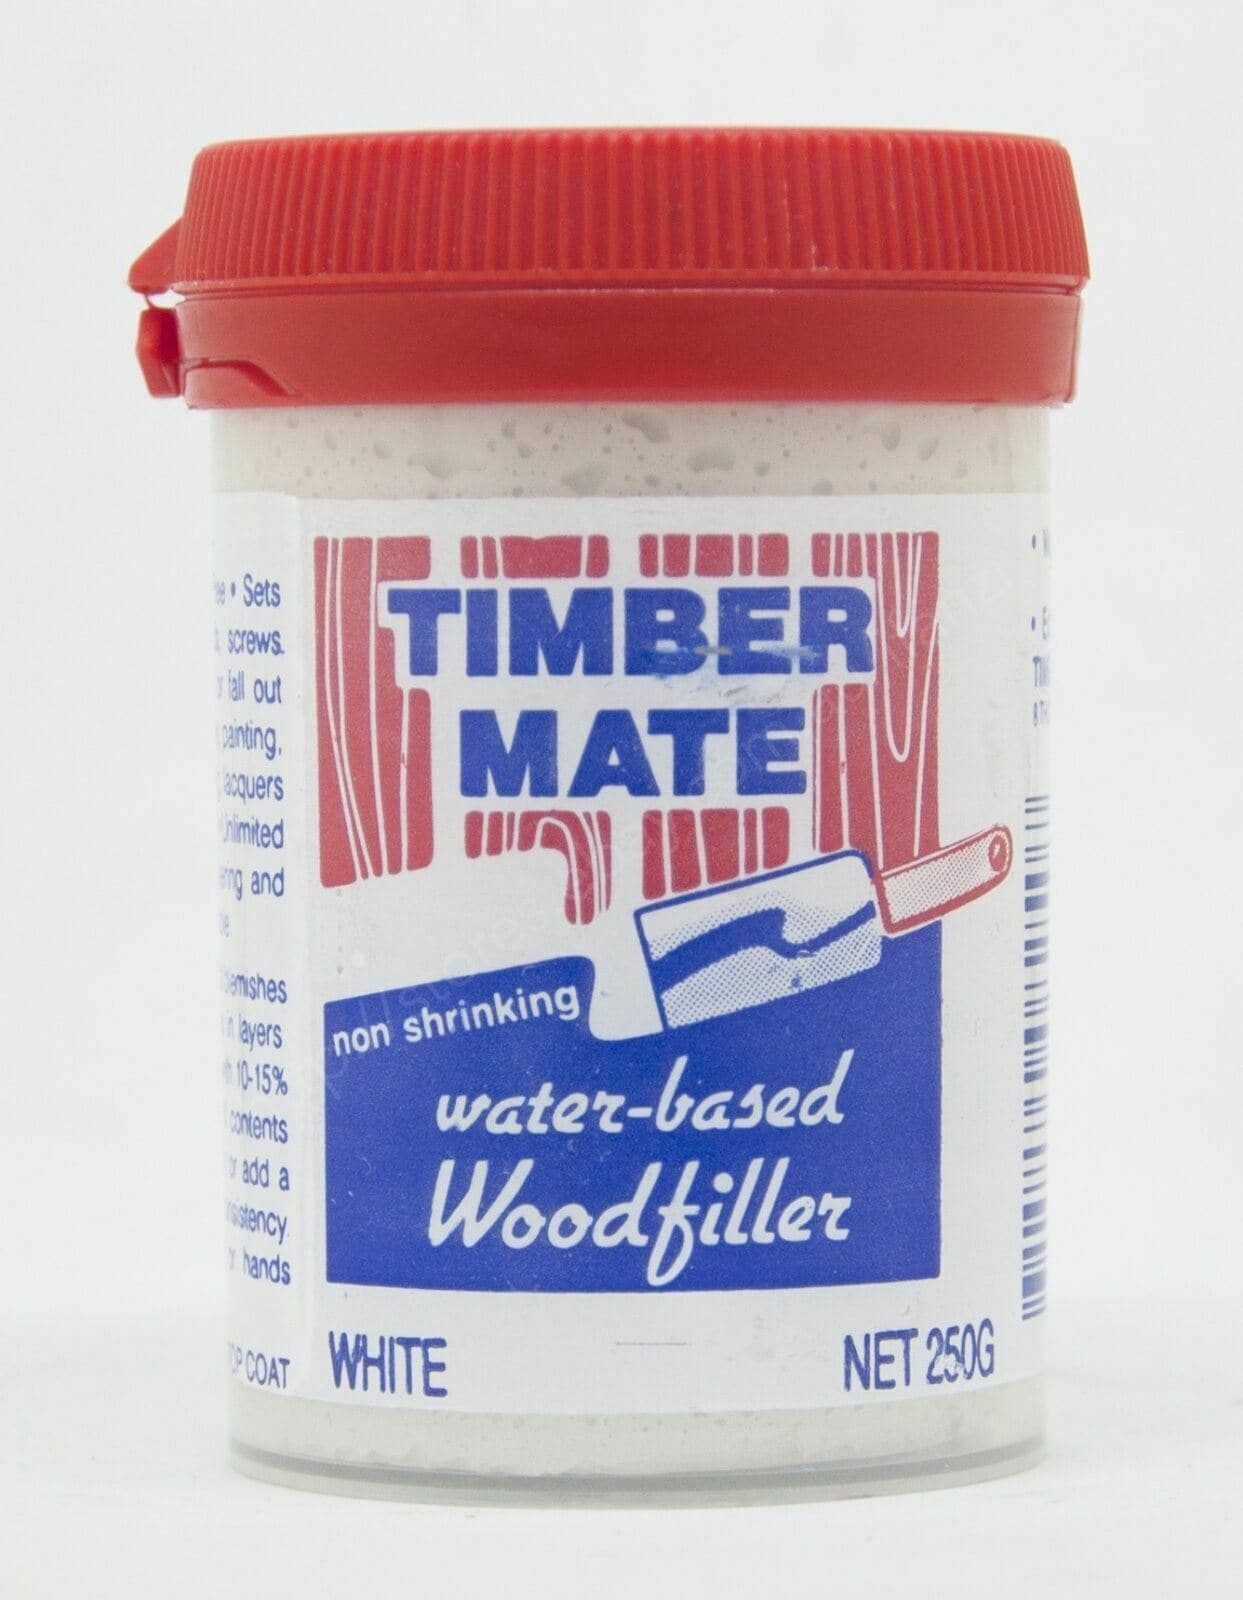 Timber Mate Water-based Wood Filler 250g WHITE TWH25 - Double Bay Hardware